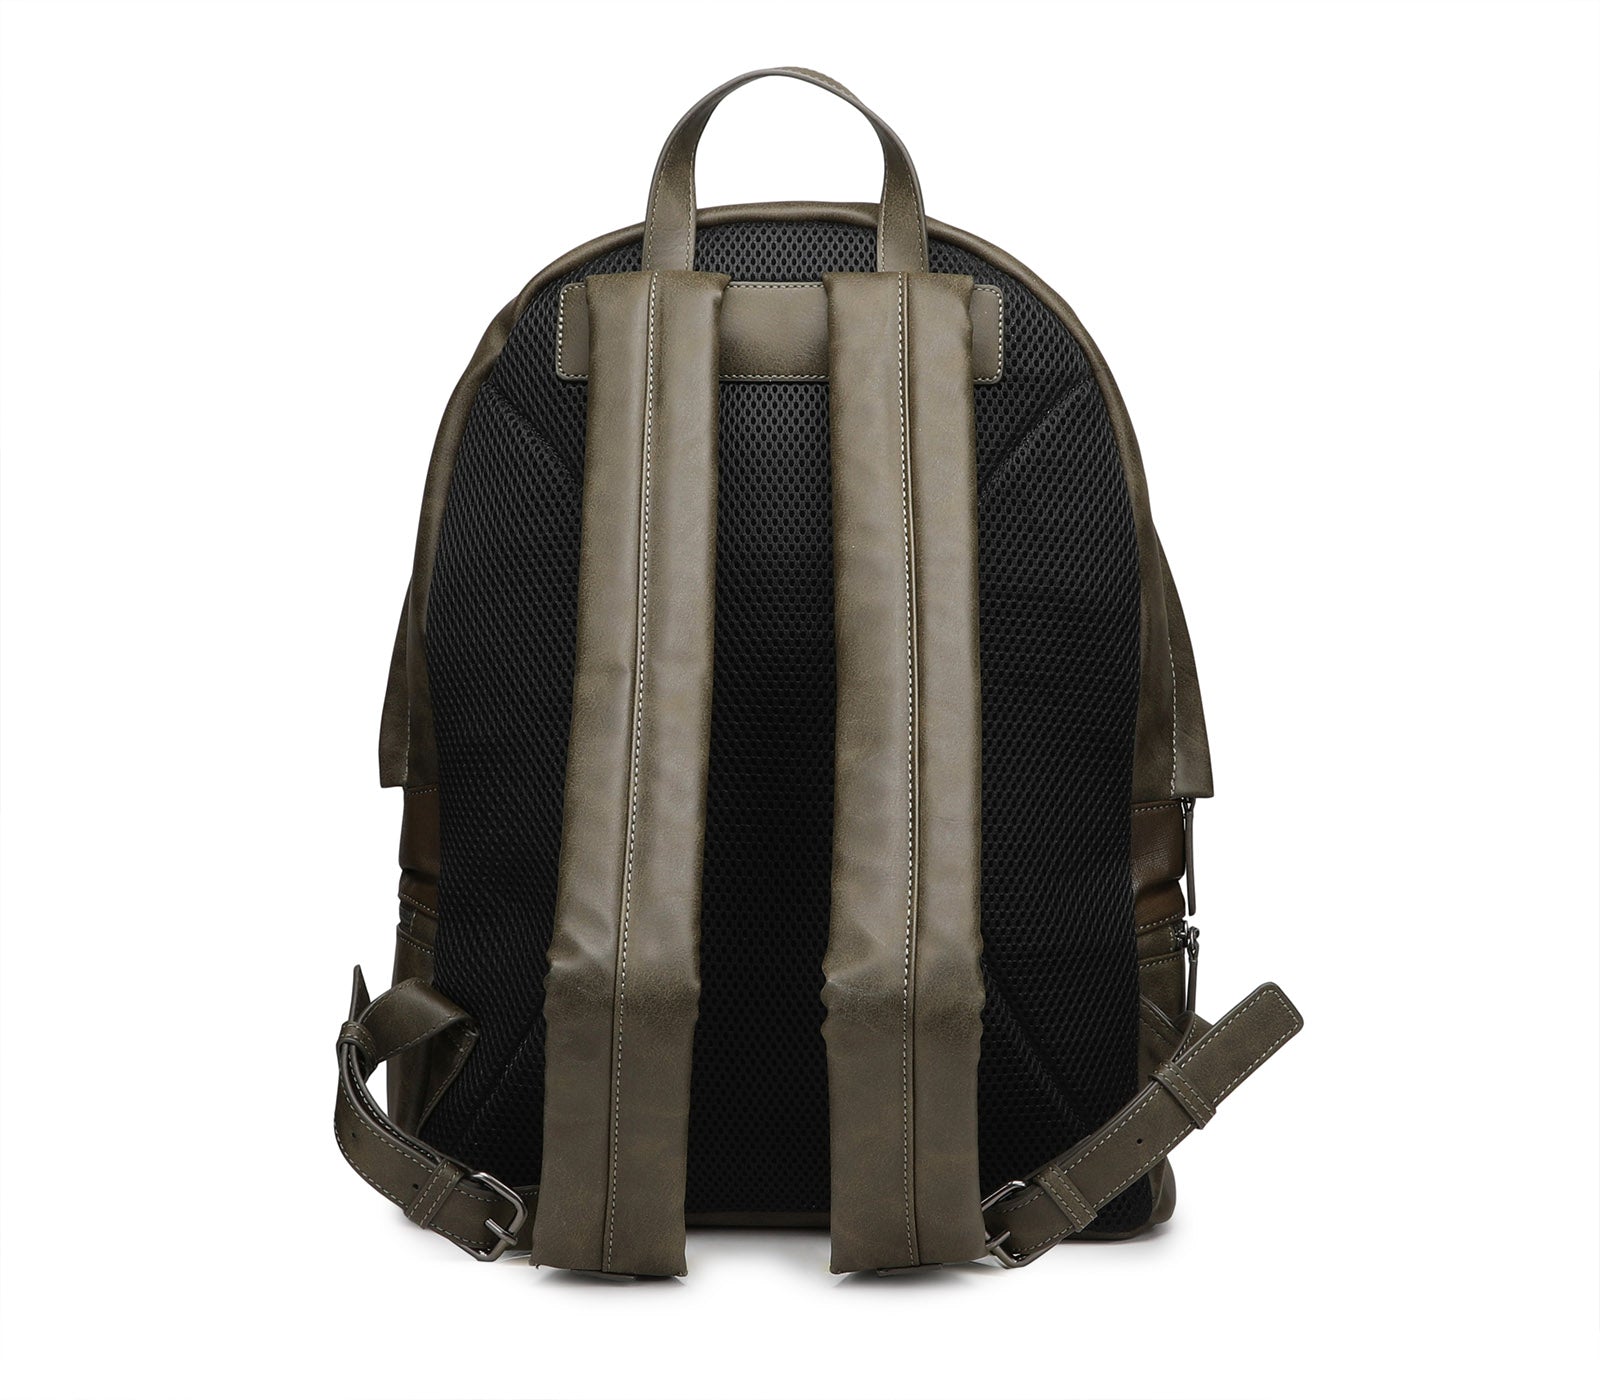 Backpack with Zip Closure and Adjustable Padded Shoulder Straps